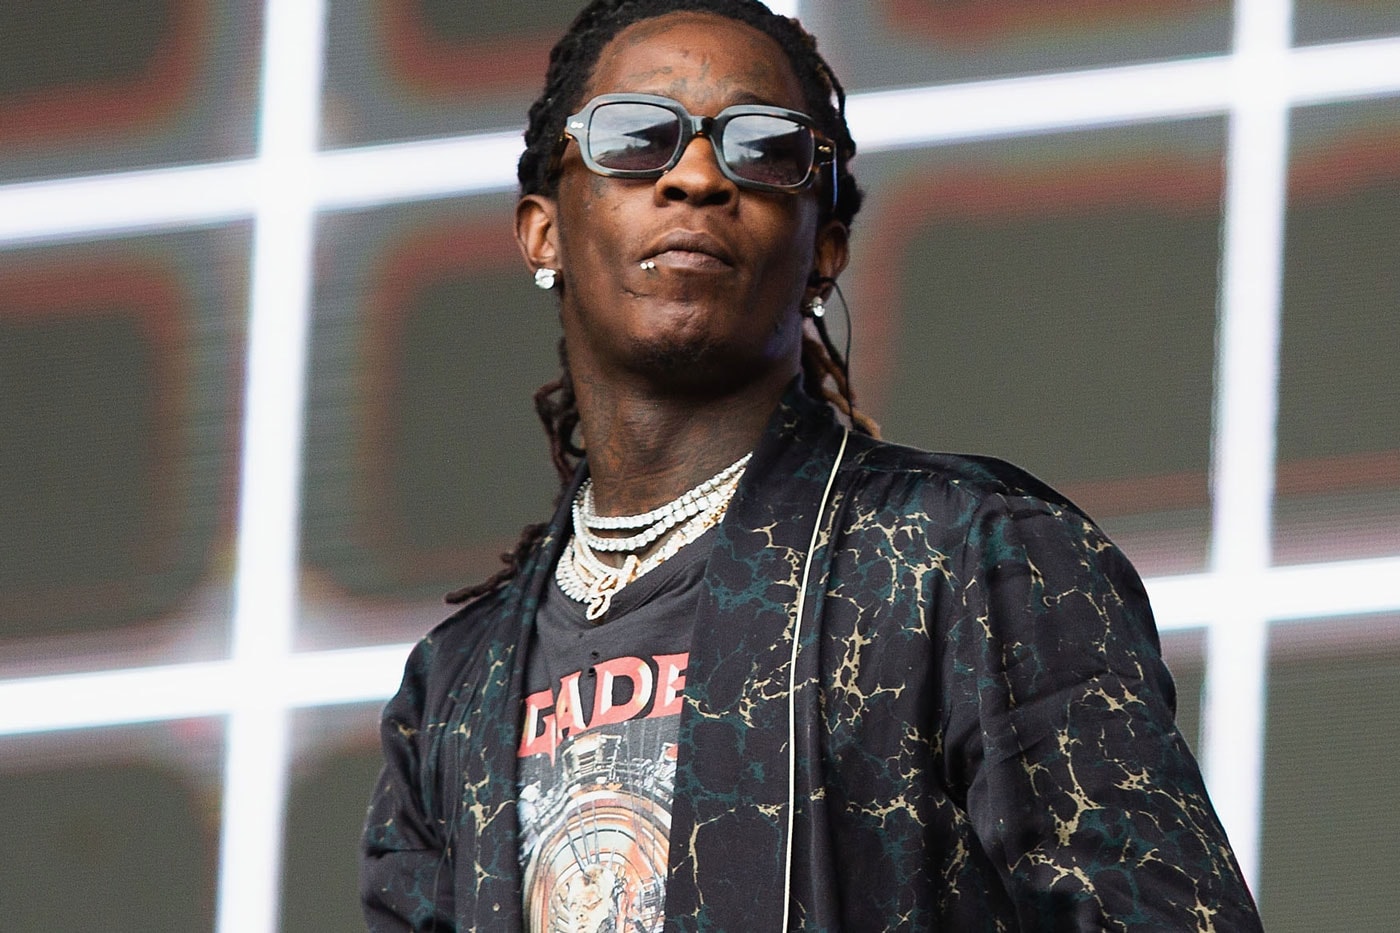 Young Thug Has Just Become the First Artist Ever to Break This Billboard Record